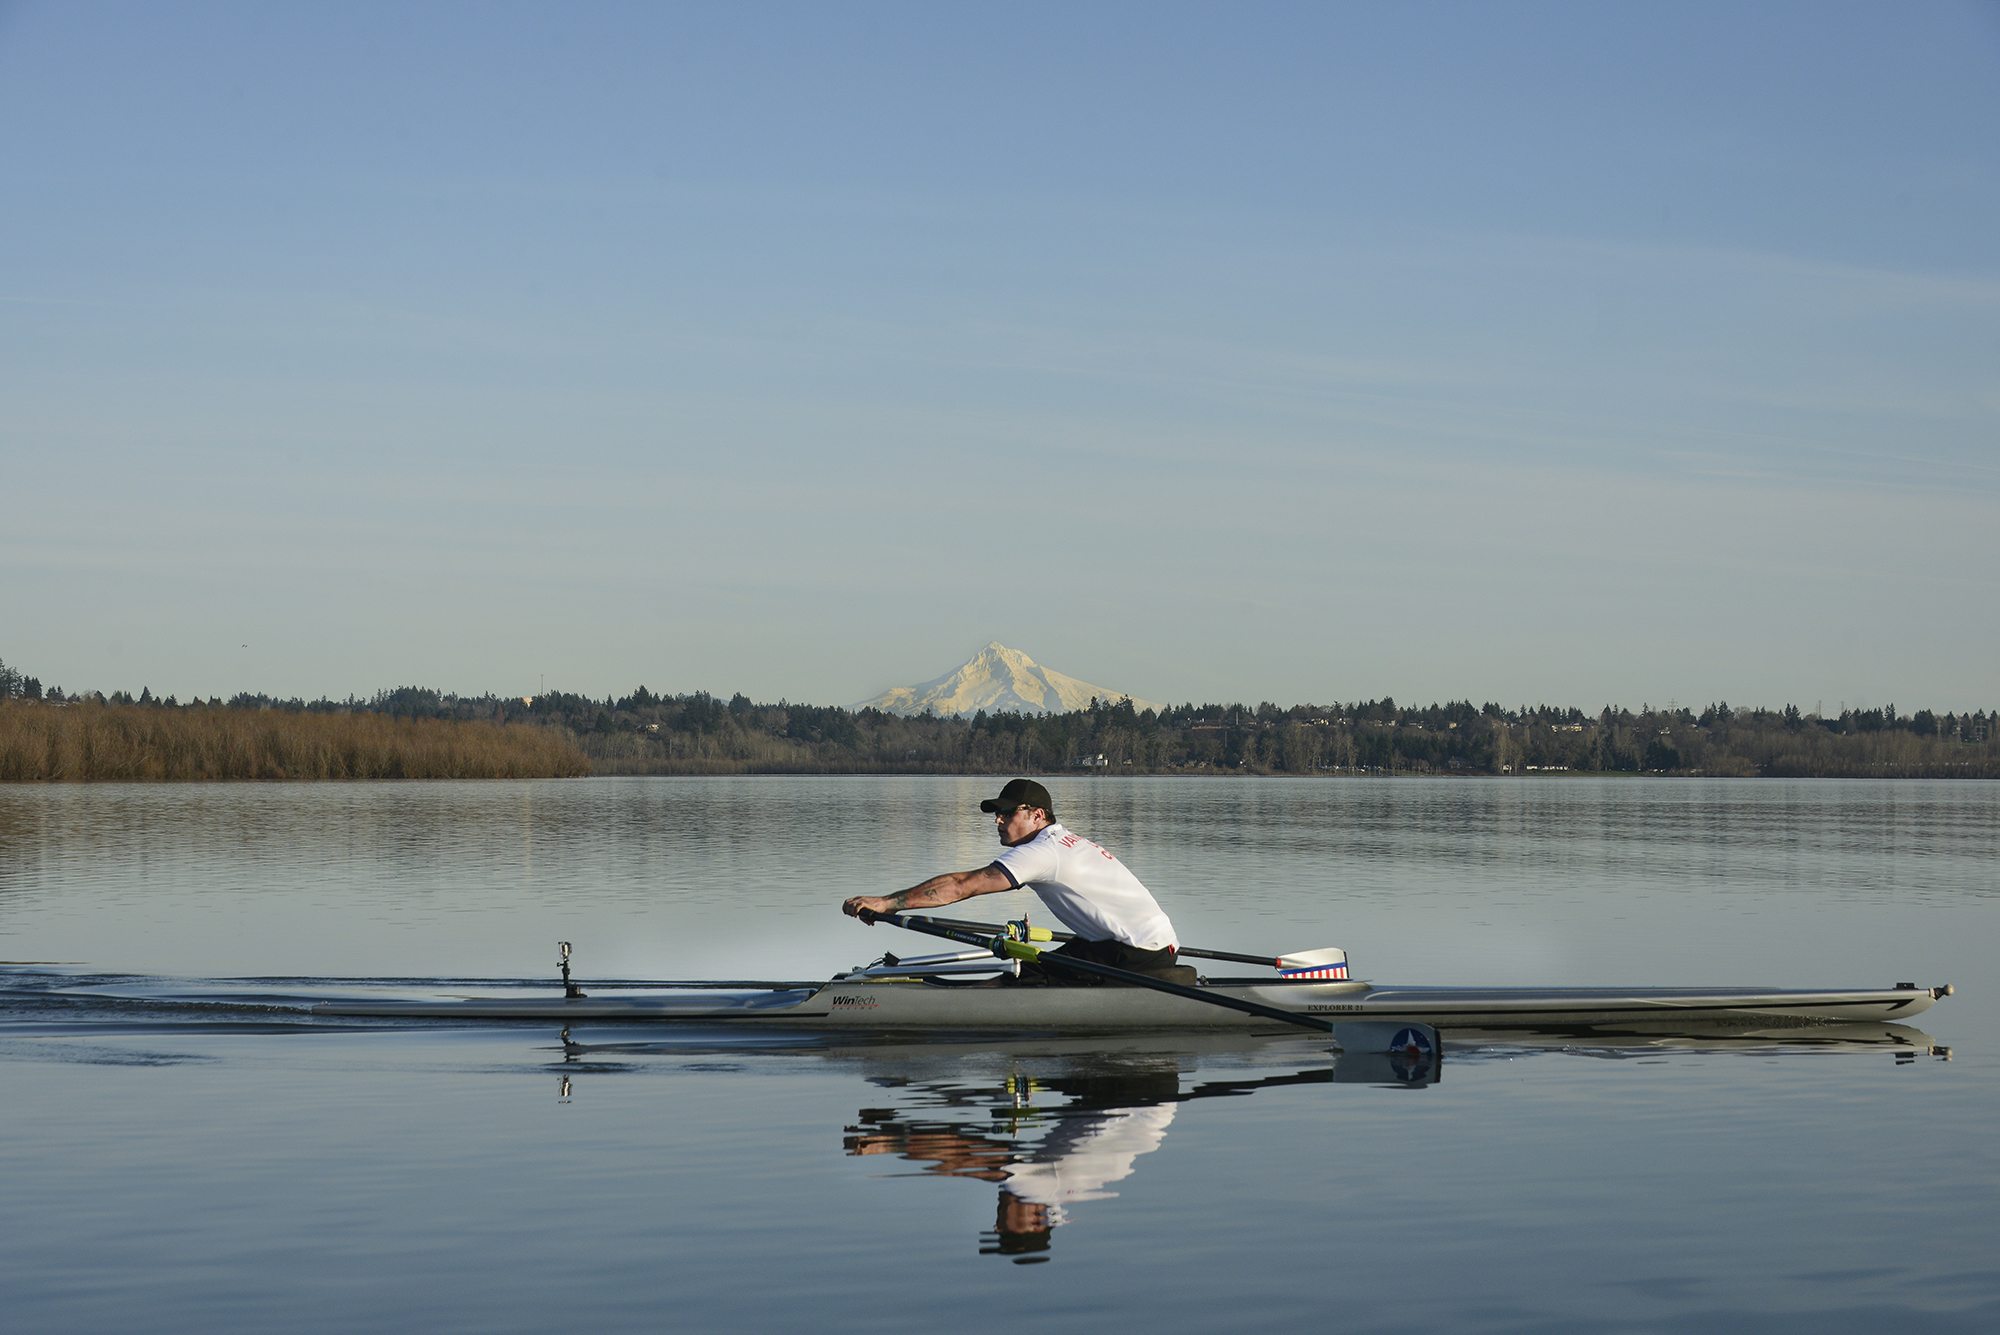 Anthony Davis rows on Vancouver Lake on a perfect day in late January, preparing for the 2016 Paralympics in Rio de Janeiro. Davis, who never rowed before 2009, qualified for the Paralympic/Adaptive National rowing team in 2012.